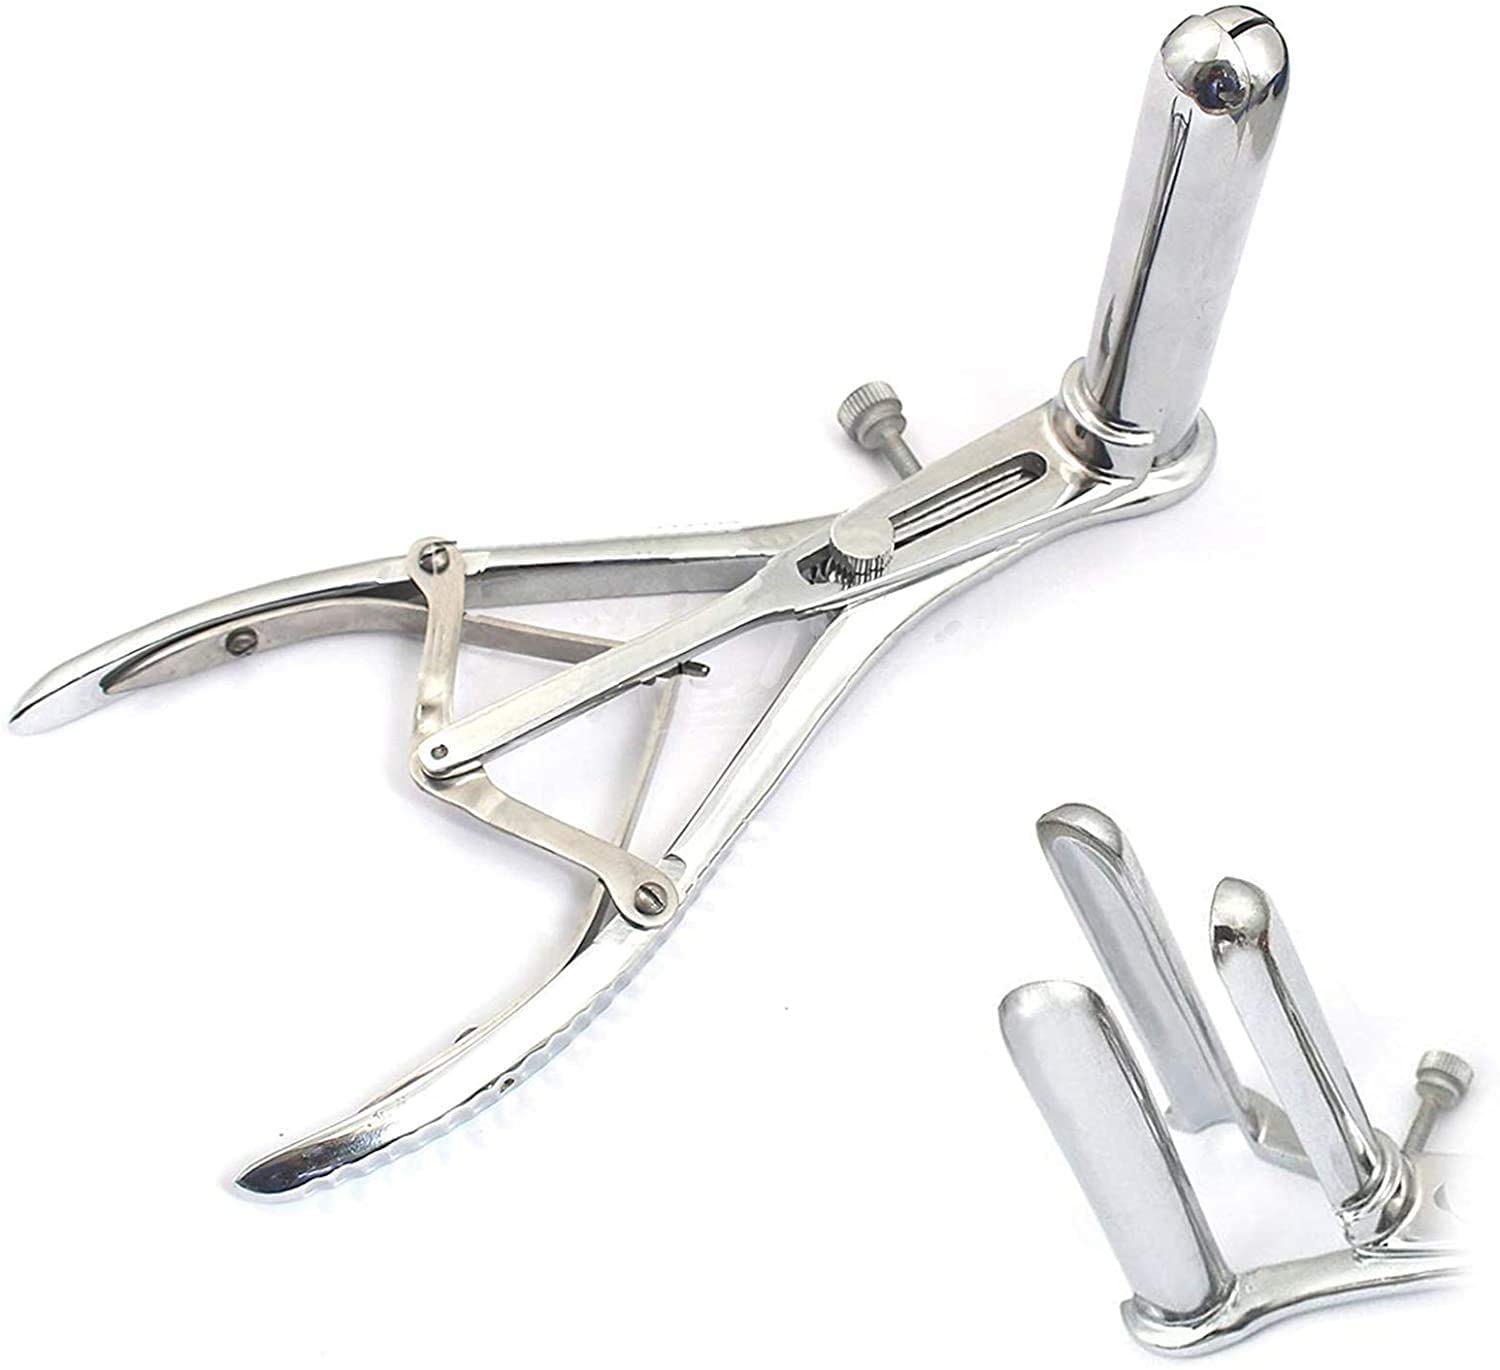 The Mathieu Anal Speculum with prongs closed.